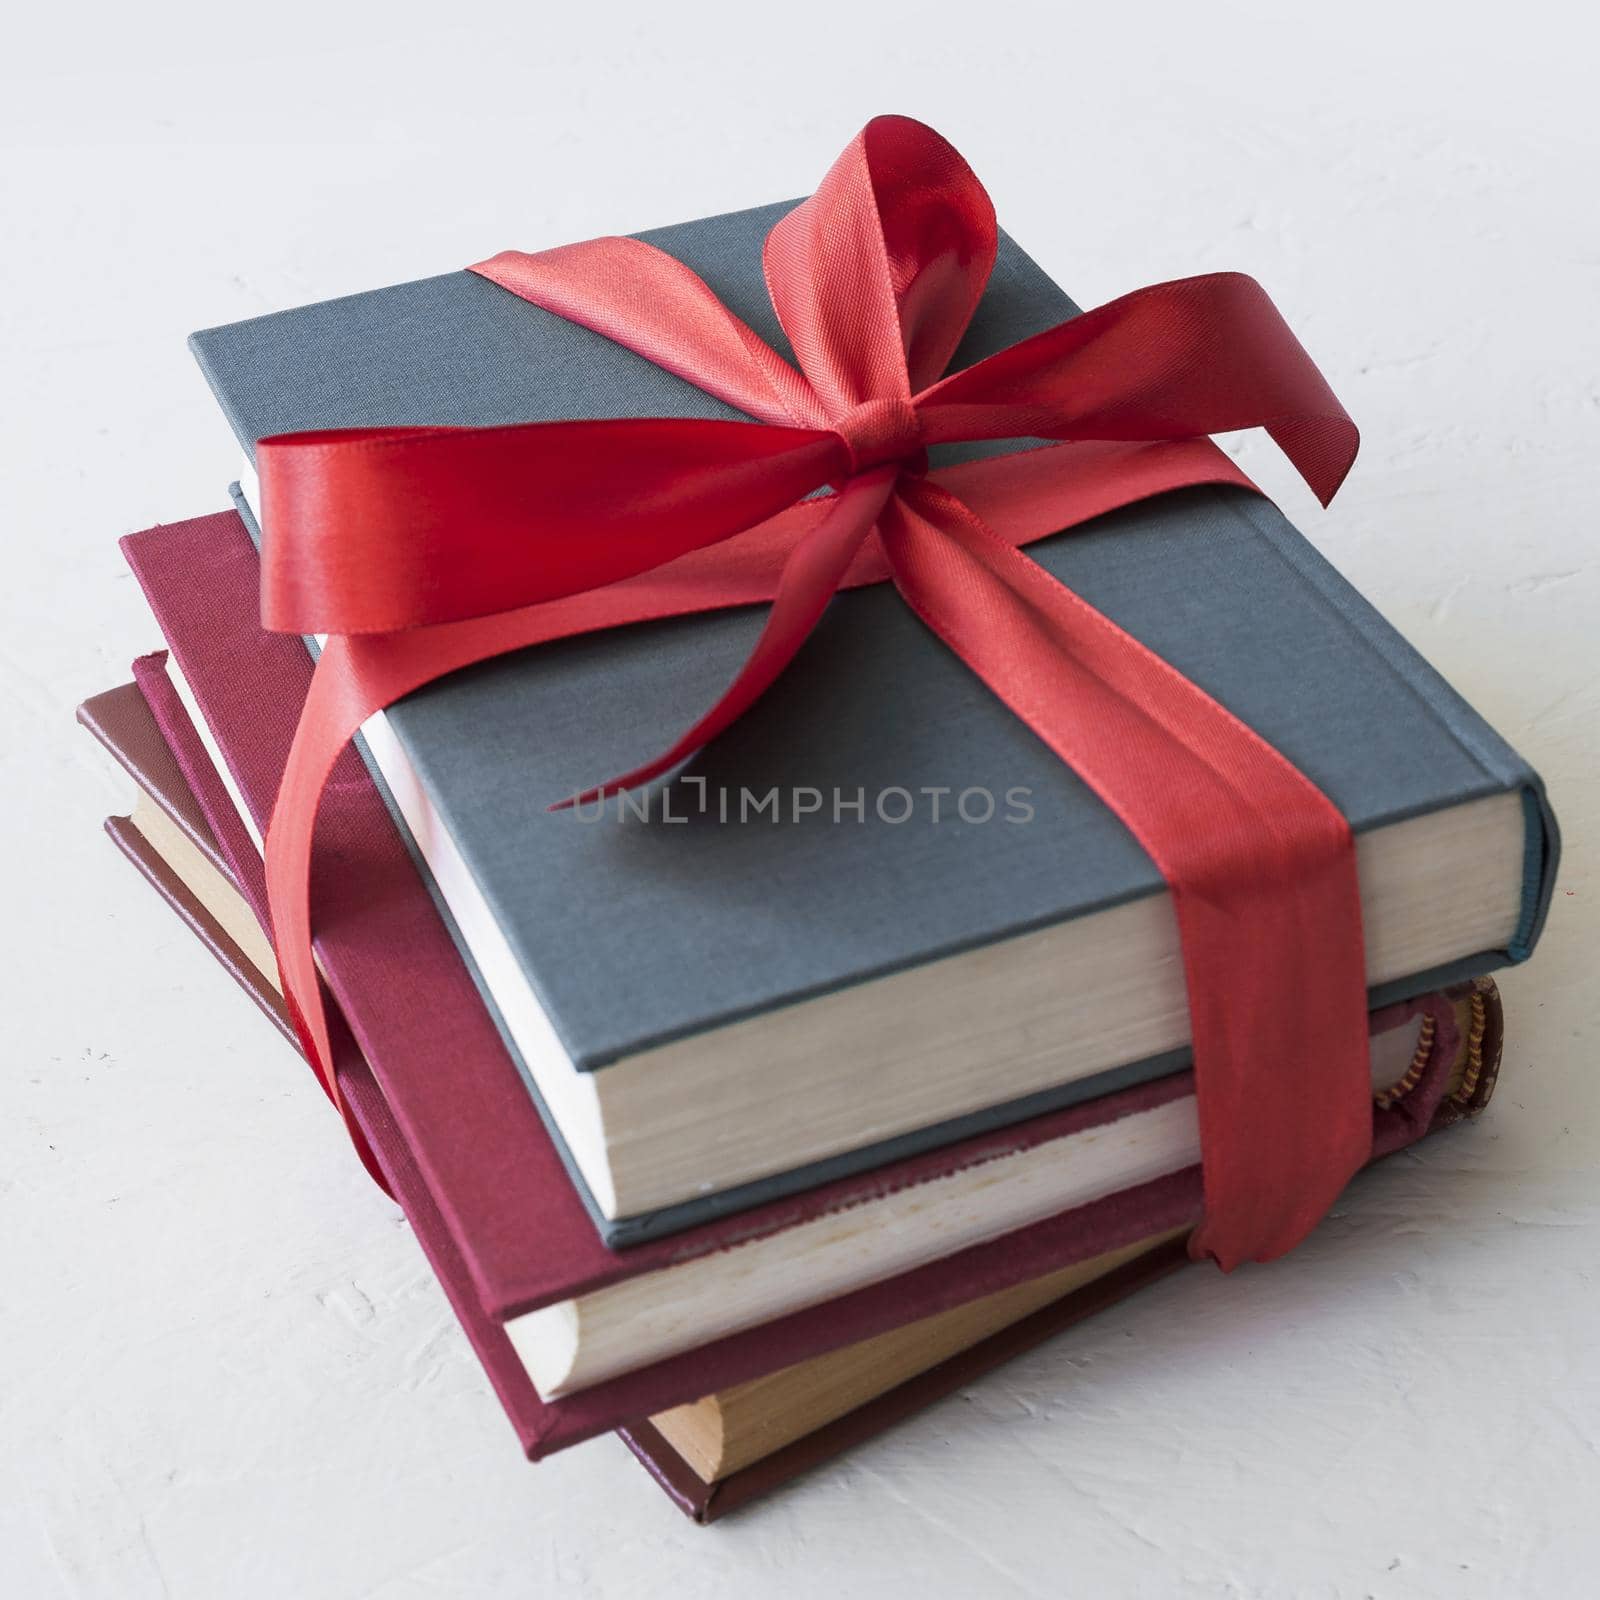 books with red ribbon. High quality beautiful photo concept by Zahard